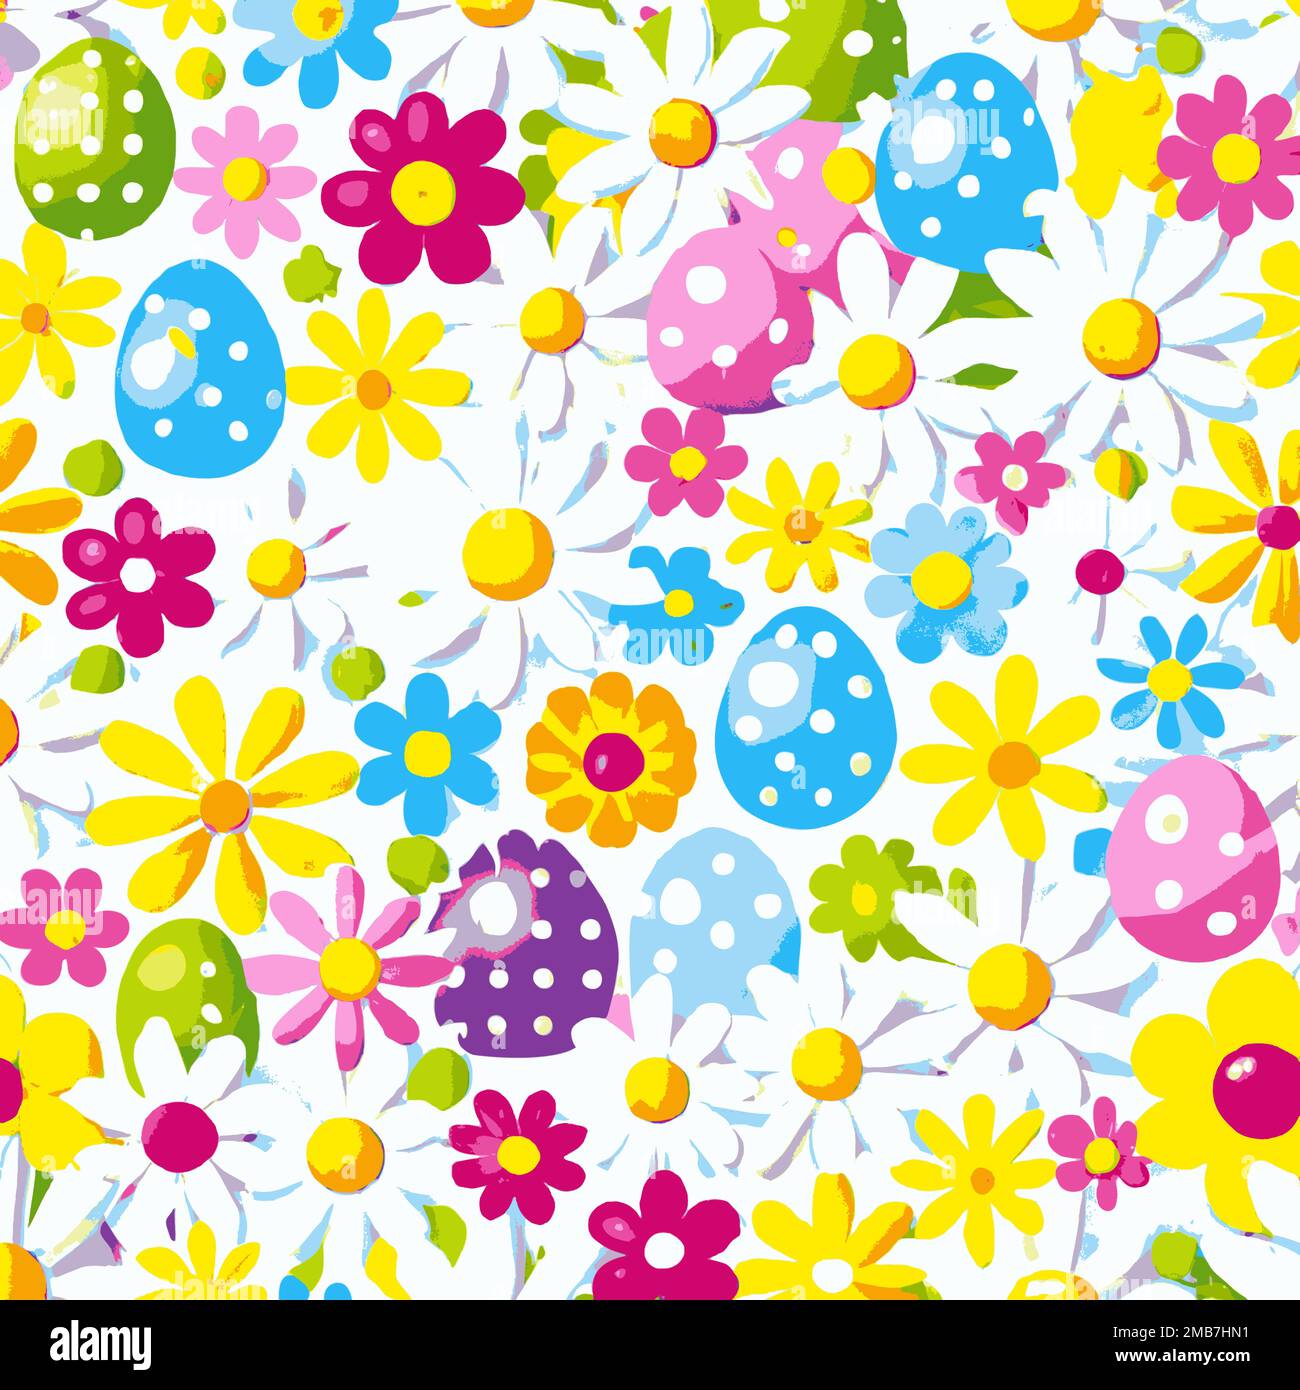 Illustration of many colorful decorated Easter eggs and flowers background pattern, red, yellow, green, blue, bright and pastel Stock Vector